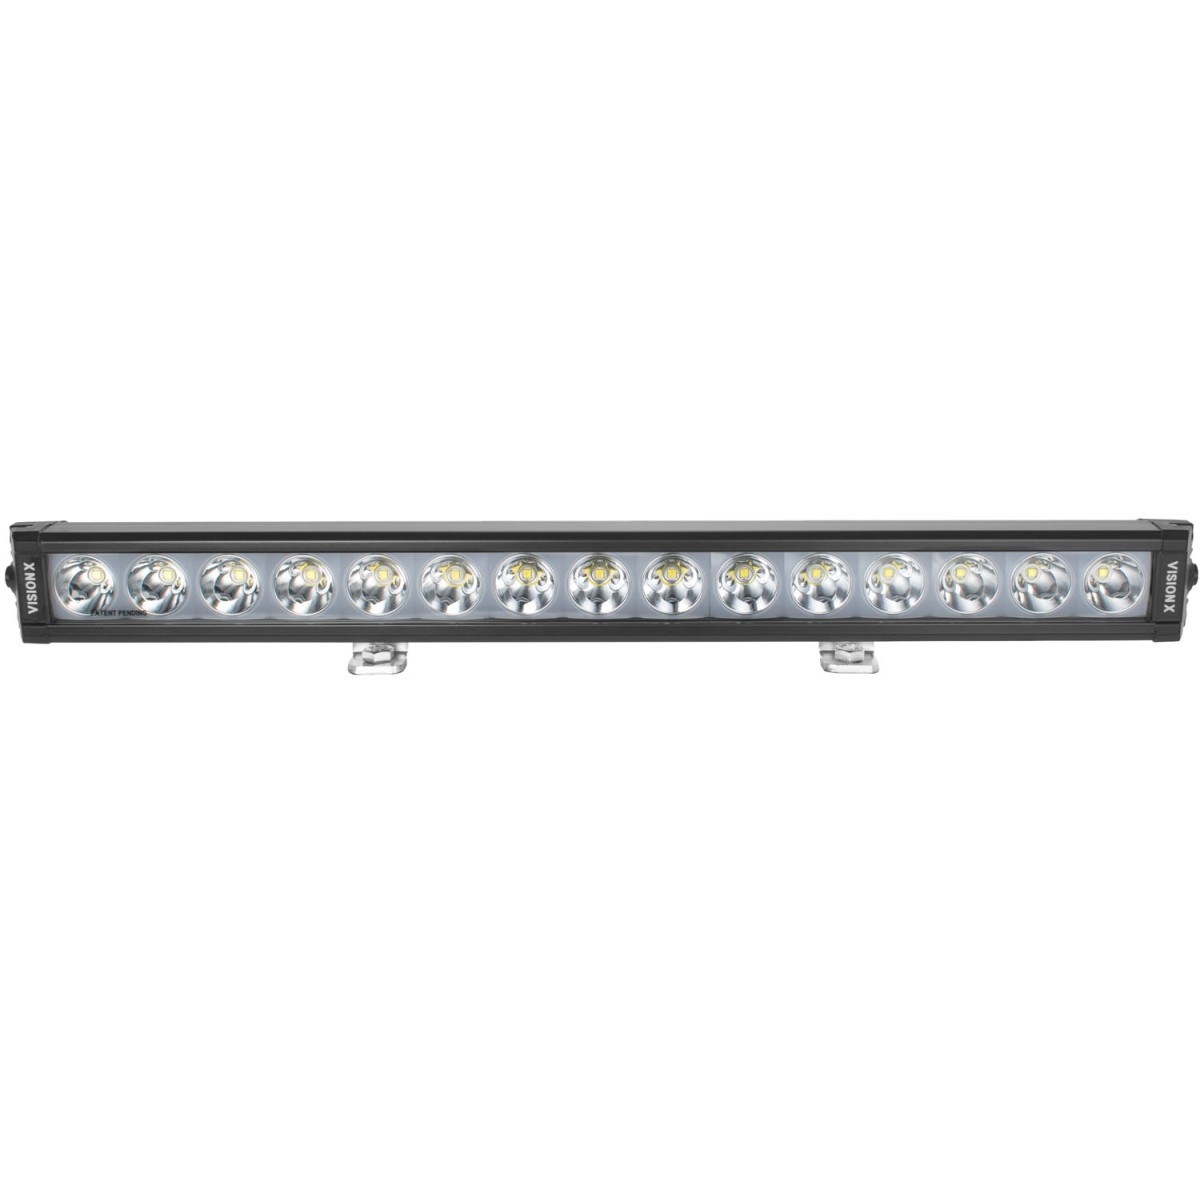 20.75IN XPL SERIES HALO 15 LED LIGHT BAR INCLUDING END CAP MOUNTING L BRACKET AN